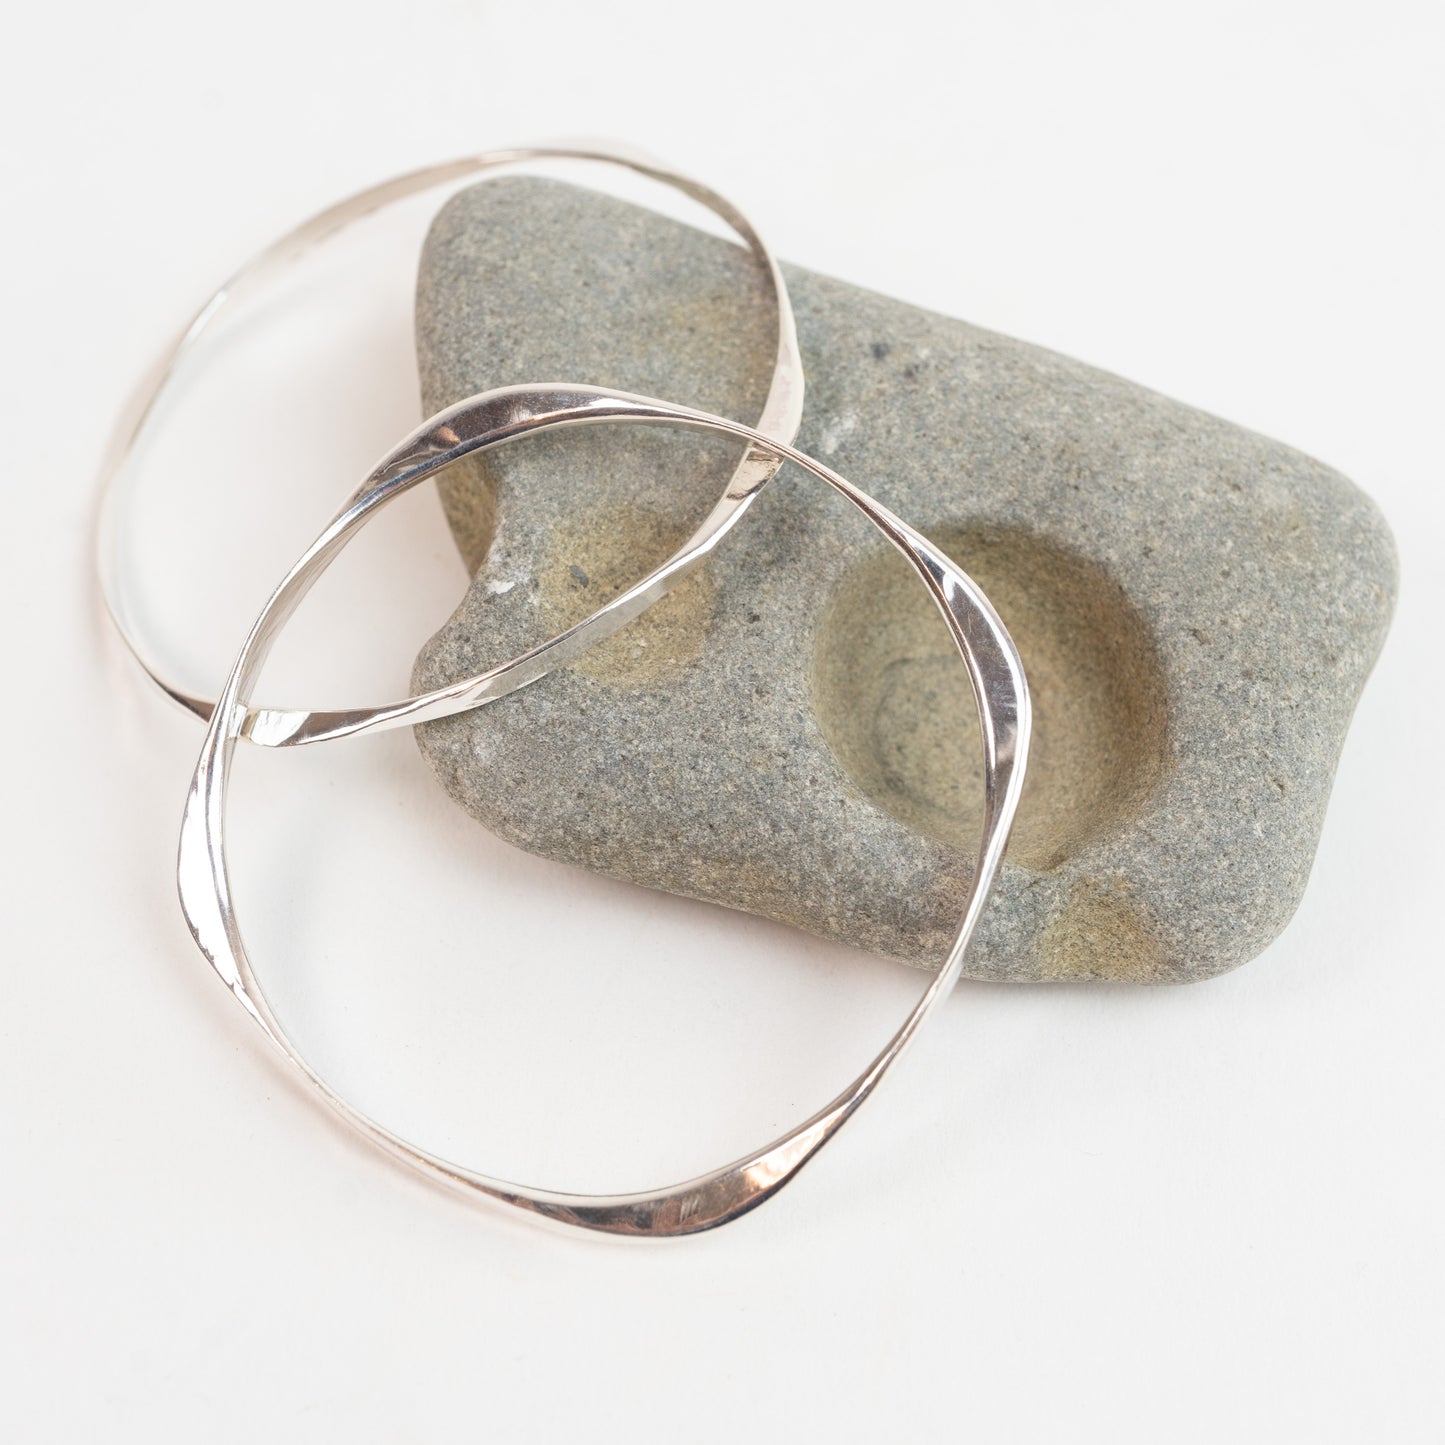 Bangle Bracelets - Sterling Silver Custom hand forged Four Way